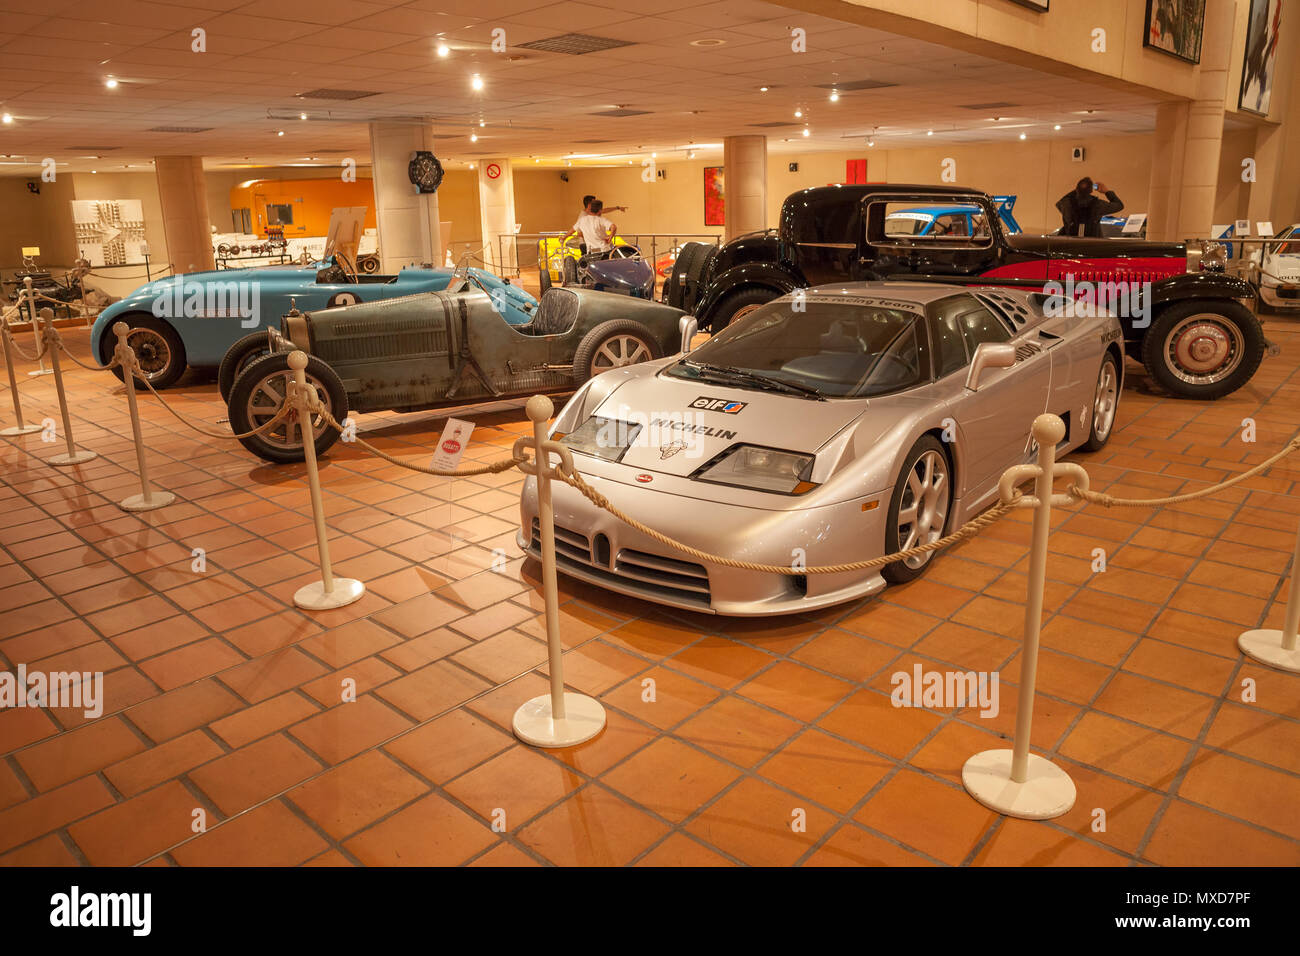 Monaco Top Cars Collection automobile museum, Bugatti cars, Exhibition of  HSH The Prince of Monaco's Vintage Car Collection Stock Photo - Alamy